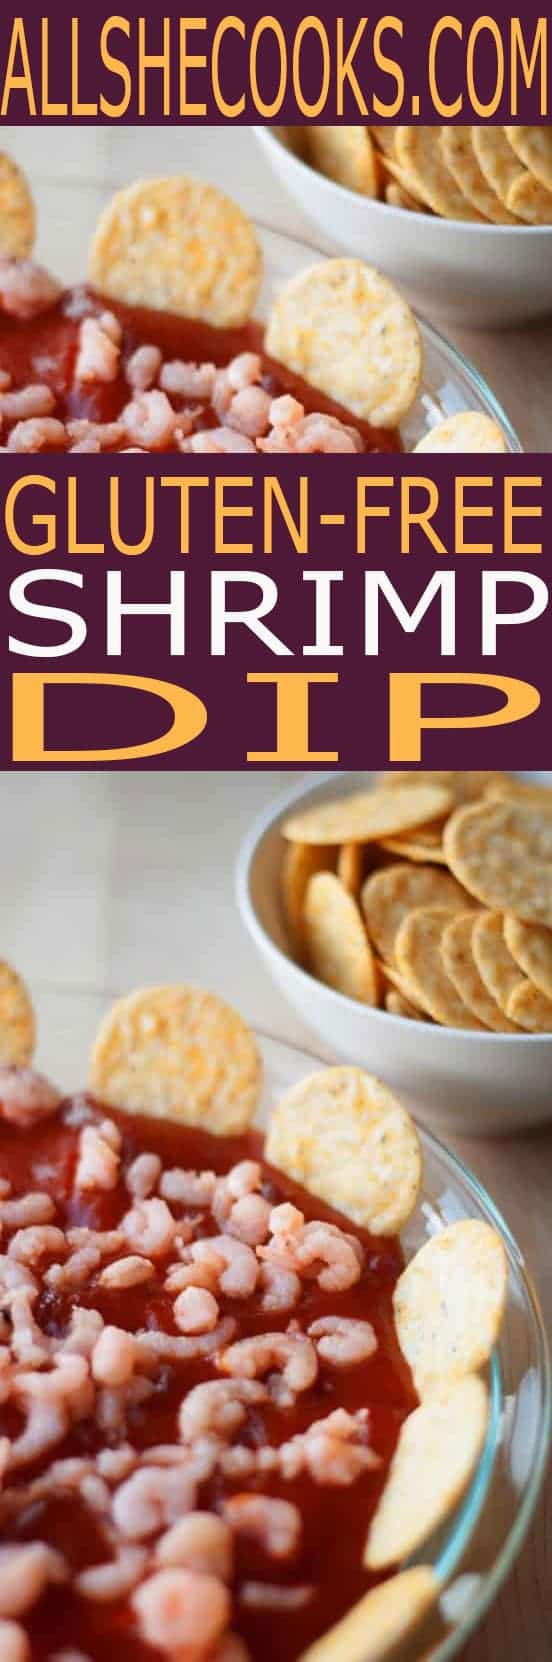 Gluten Free Shrimp Dip is an easy appetizer to put together on a whim. Enjoy this delicious dip at your next party.